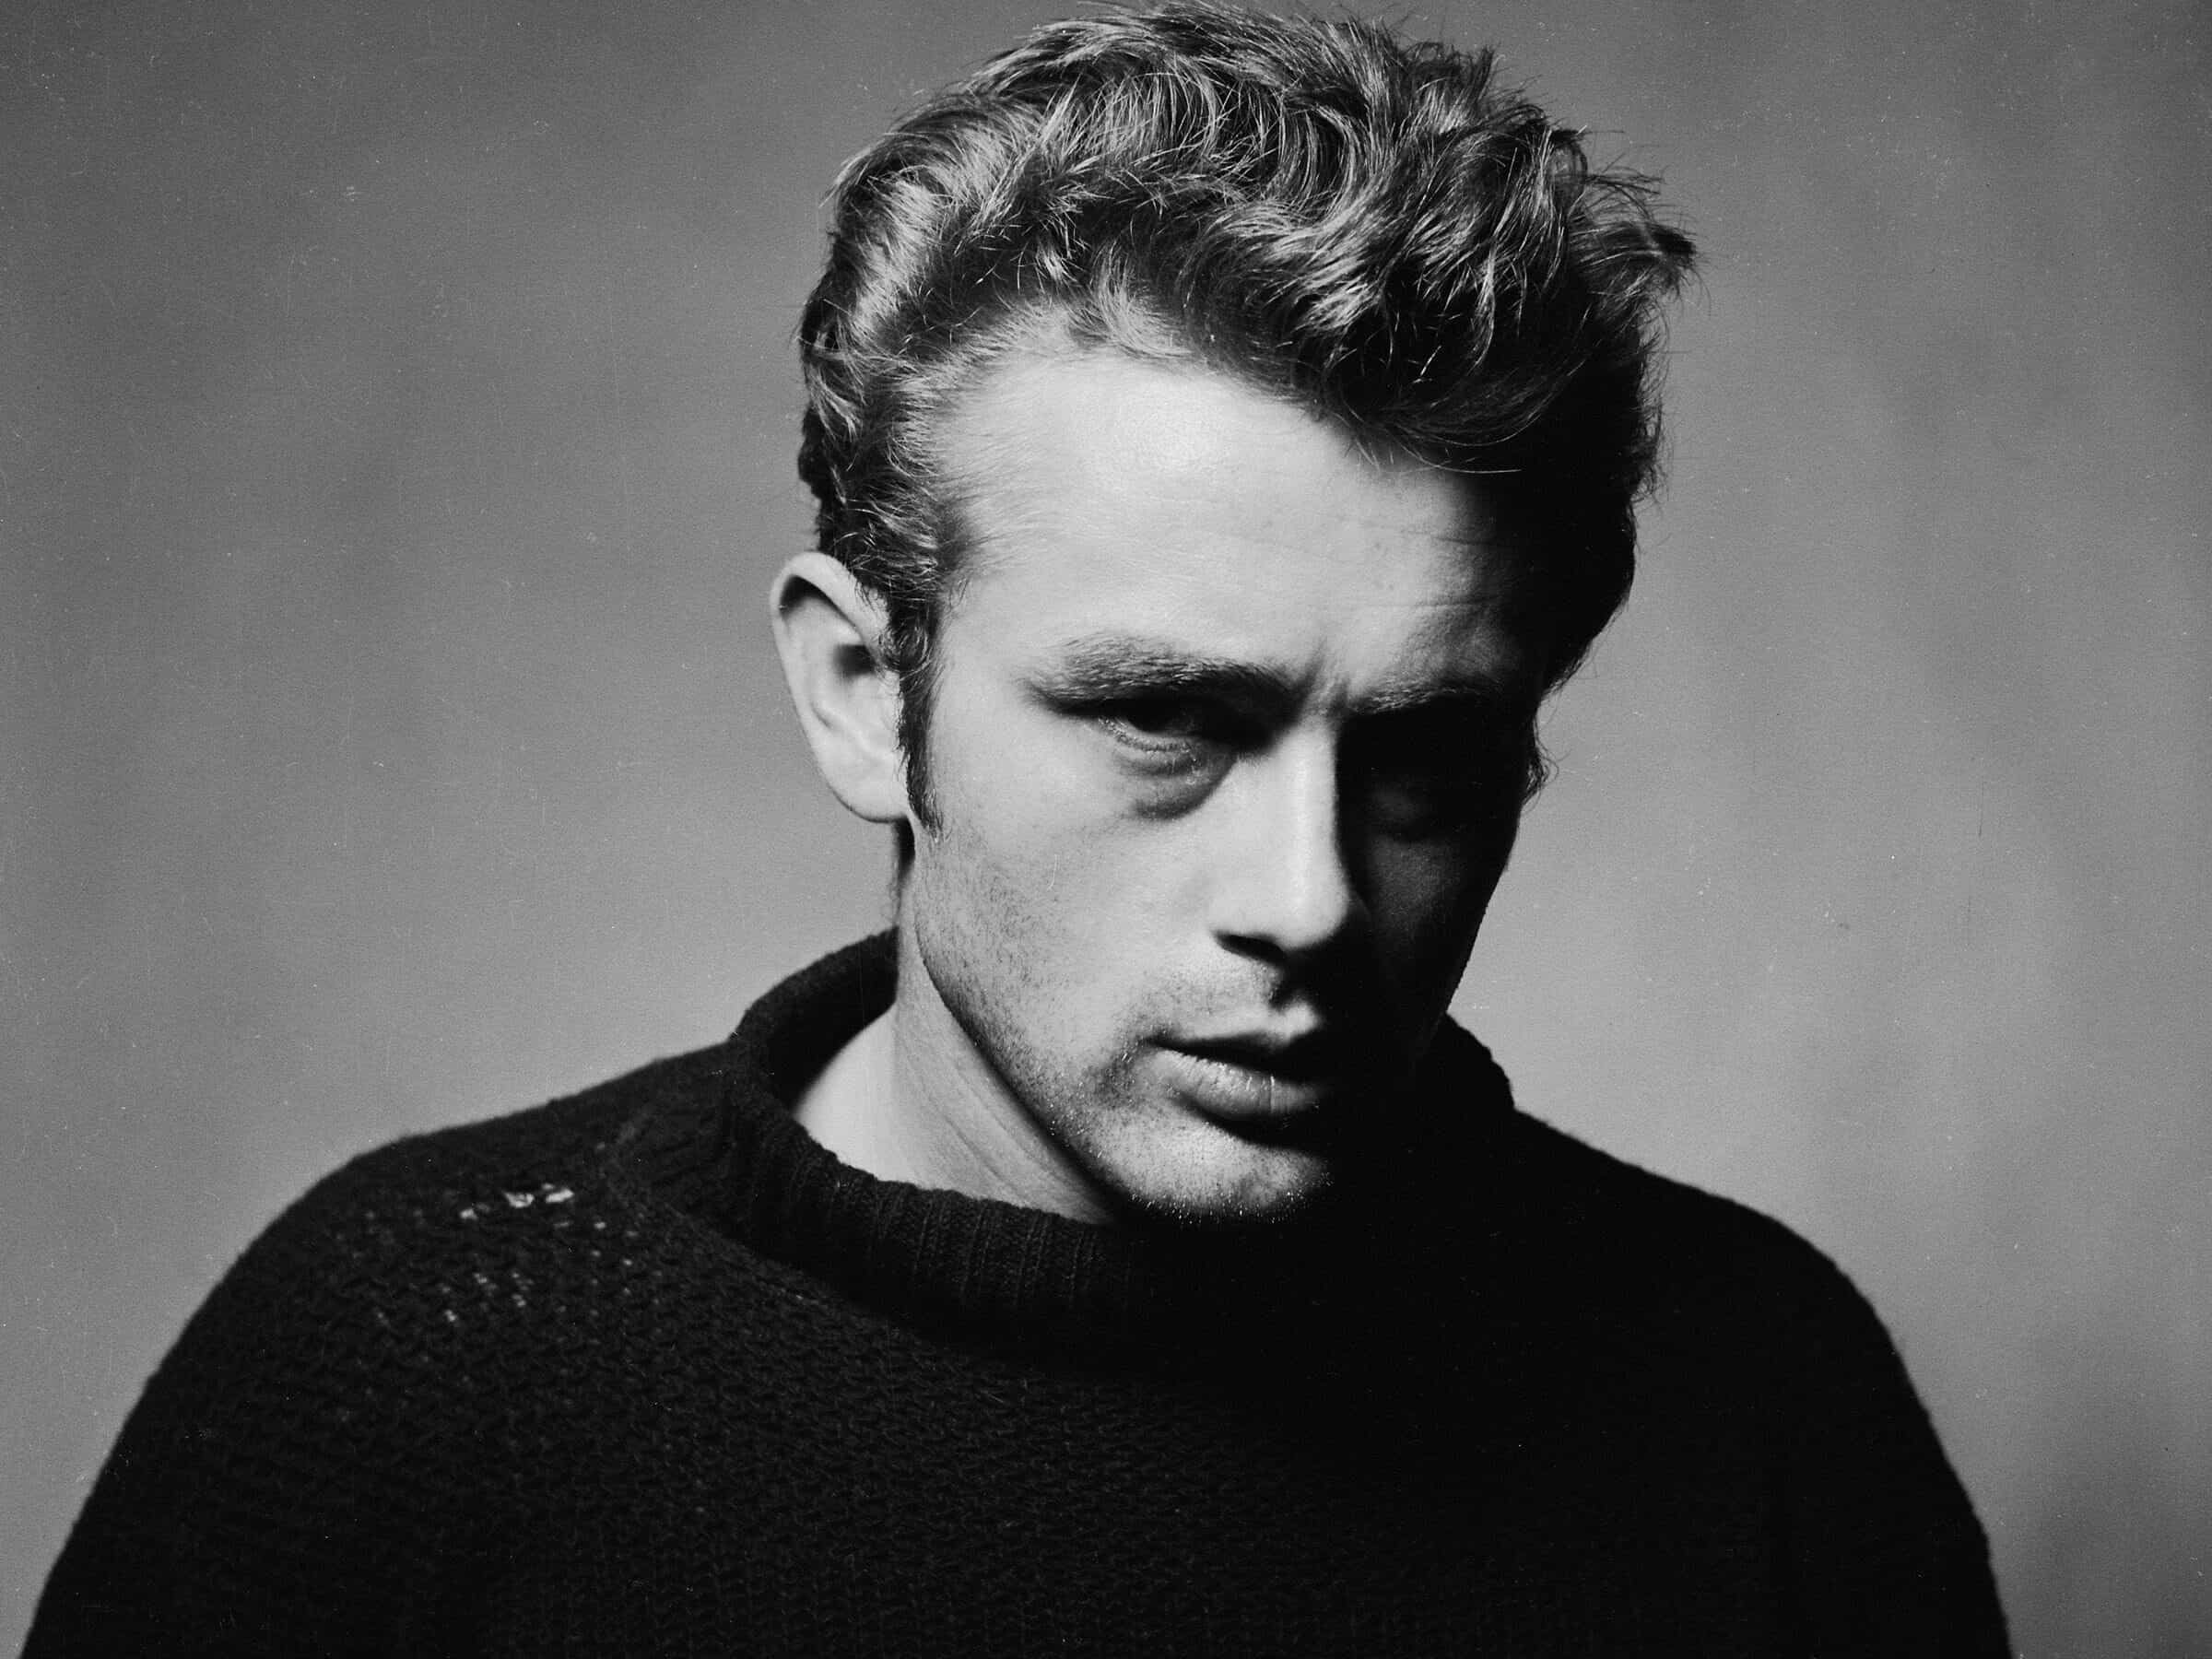 A moody Dean in a black turtleneck for the LIFE magazine photo shoot, "Torn Sweater."